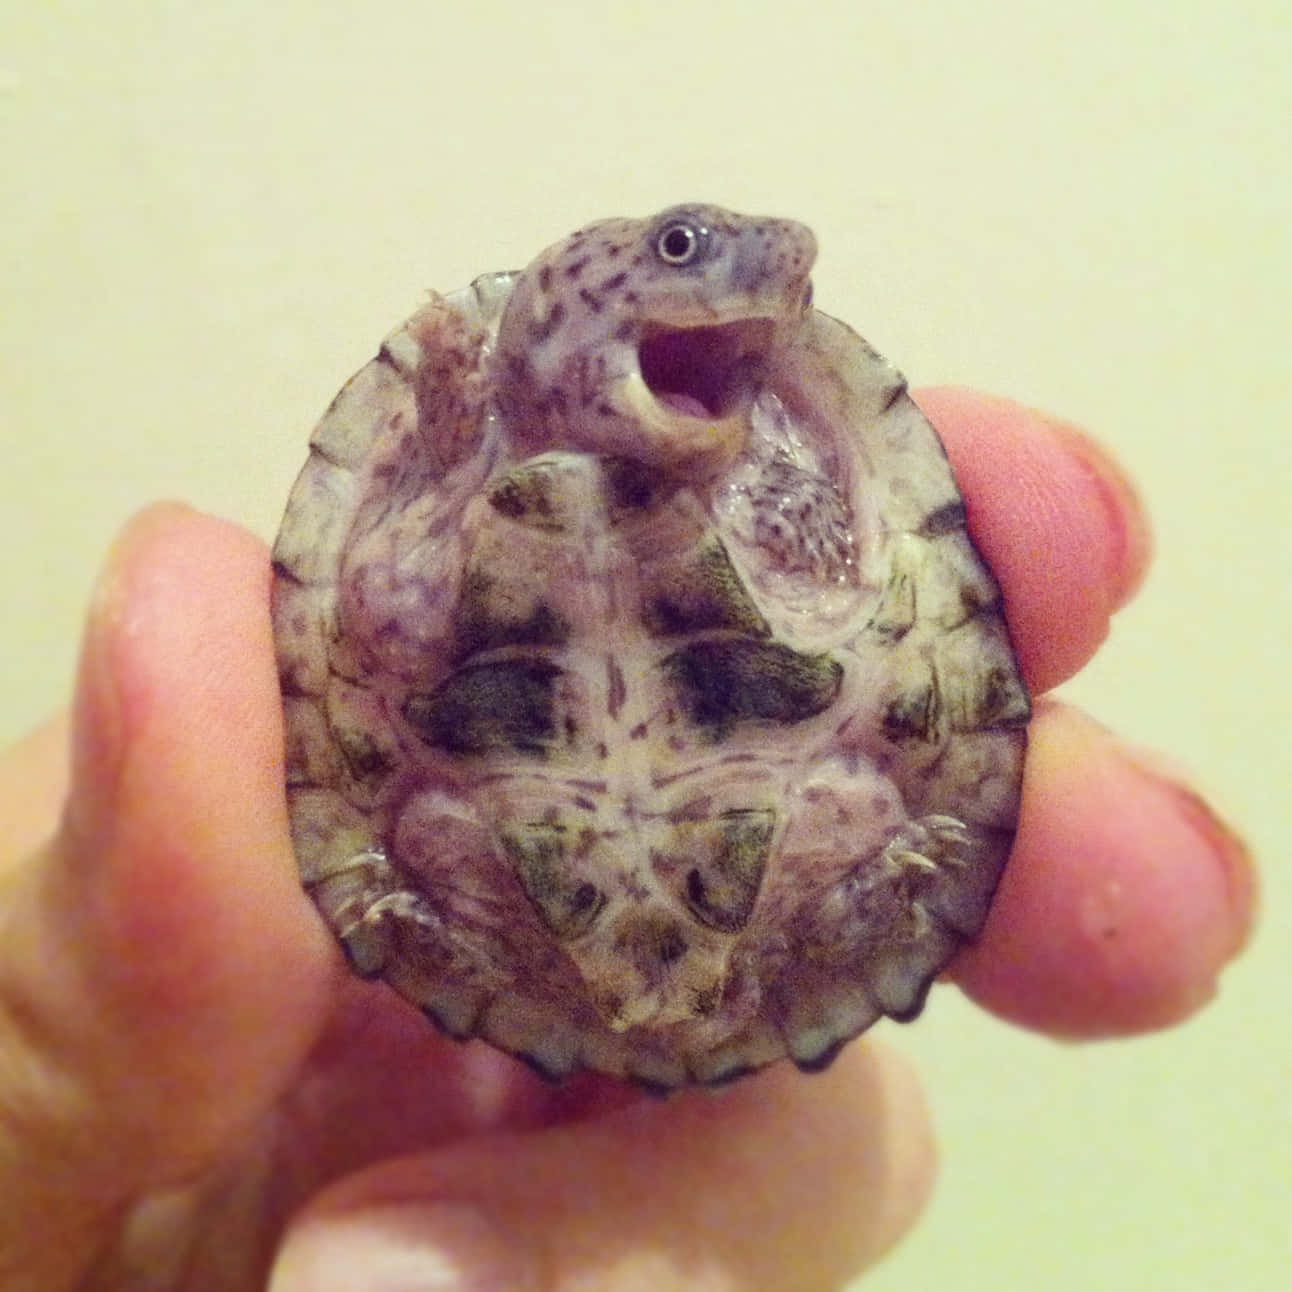 "An adorable baby turtle"